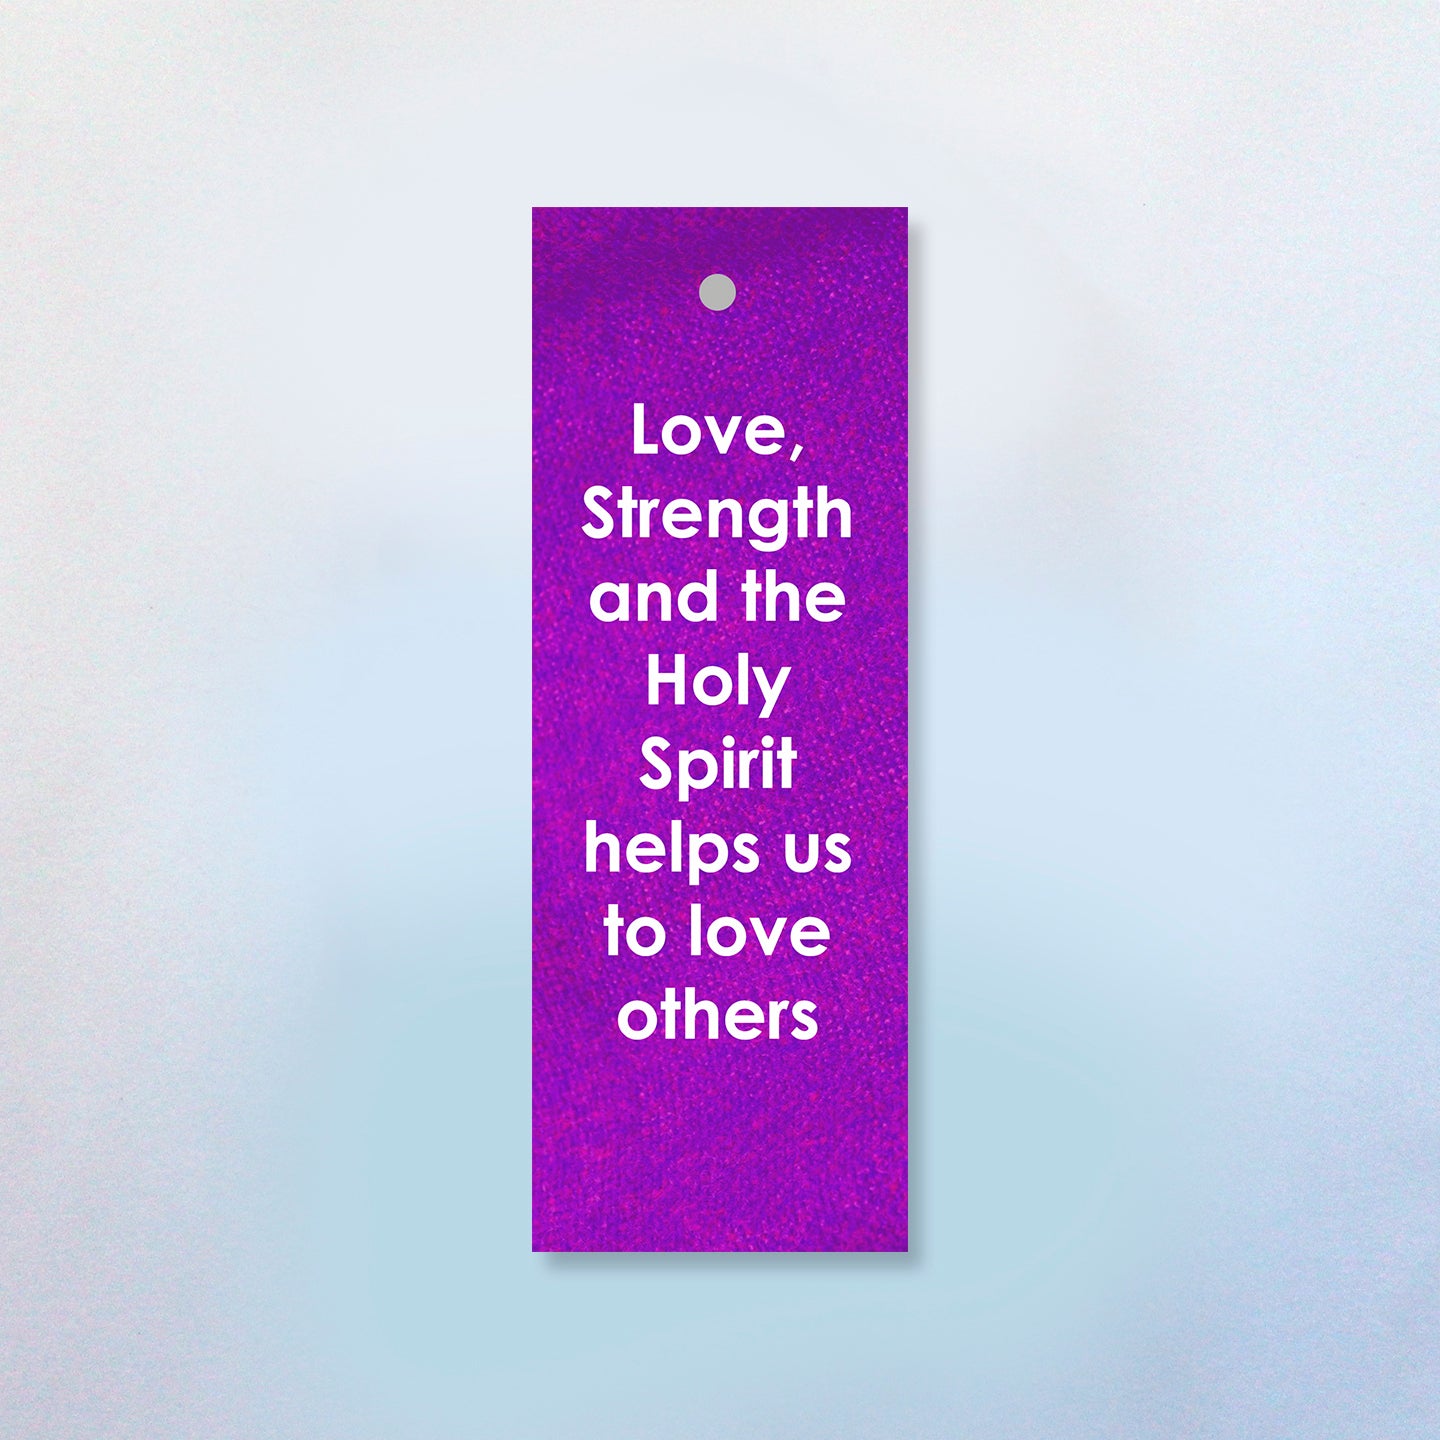 The Love, Strength and the Holy Spirit Helps Us to Love Others (2 Styles) Bookmark